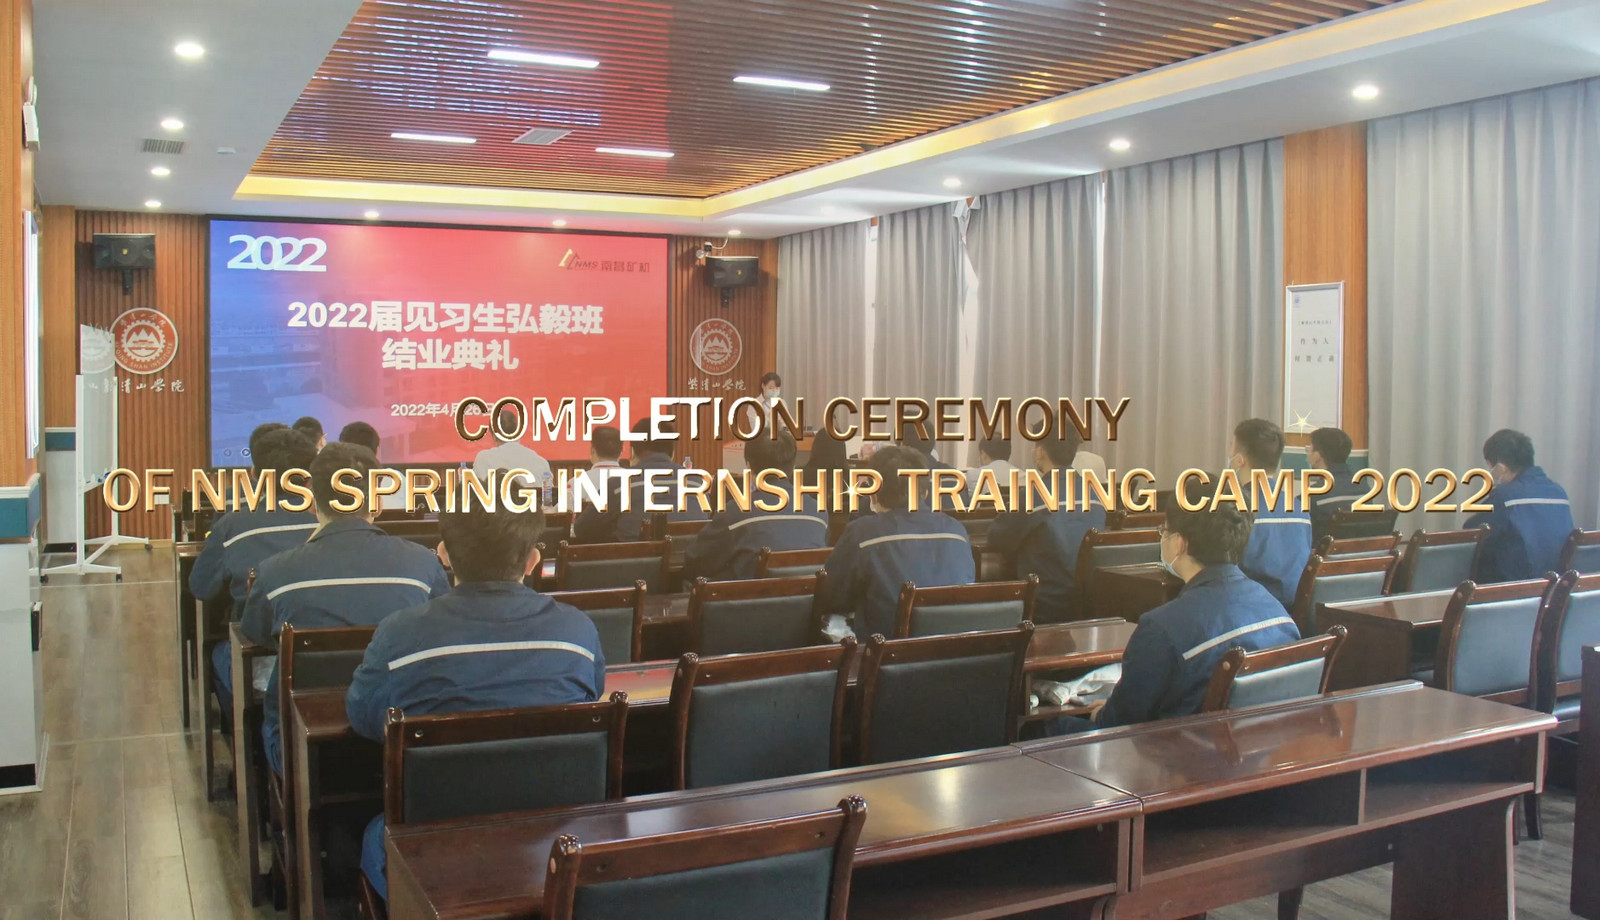 Completion Ceremony of NMS Spring Internship Training Camp 2022